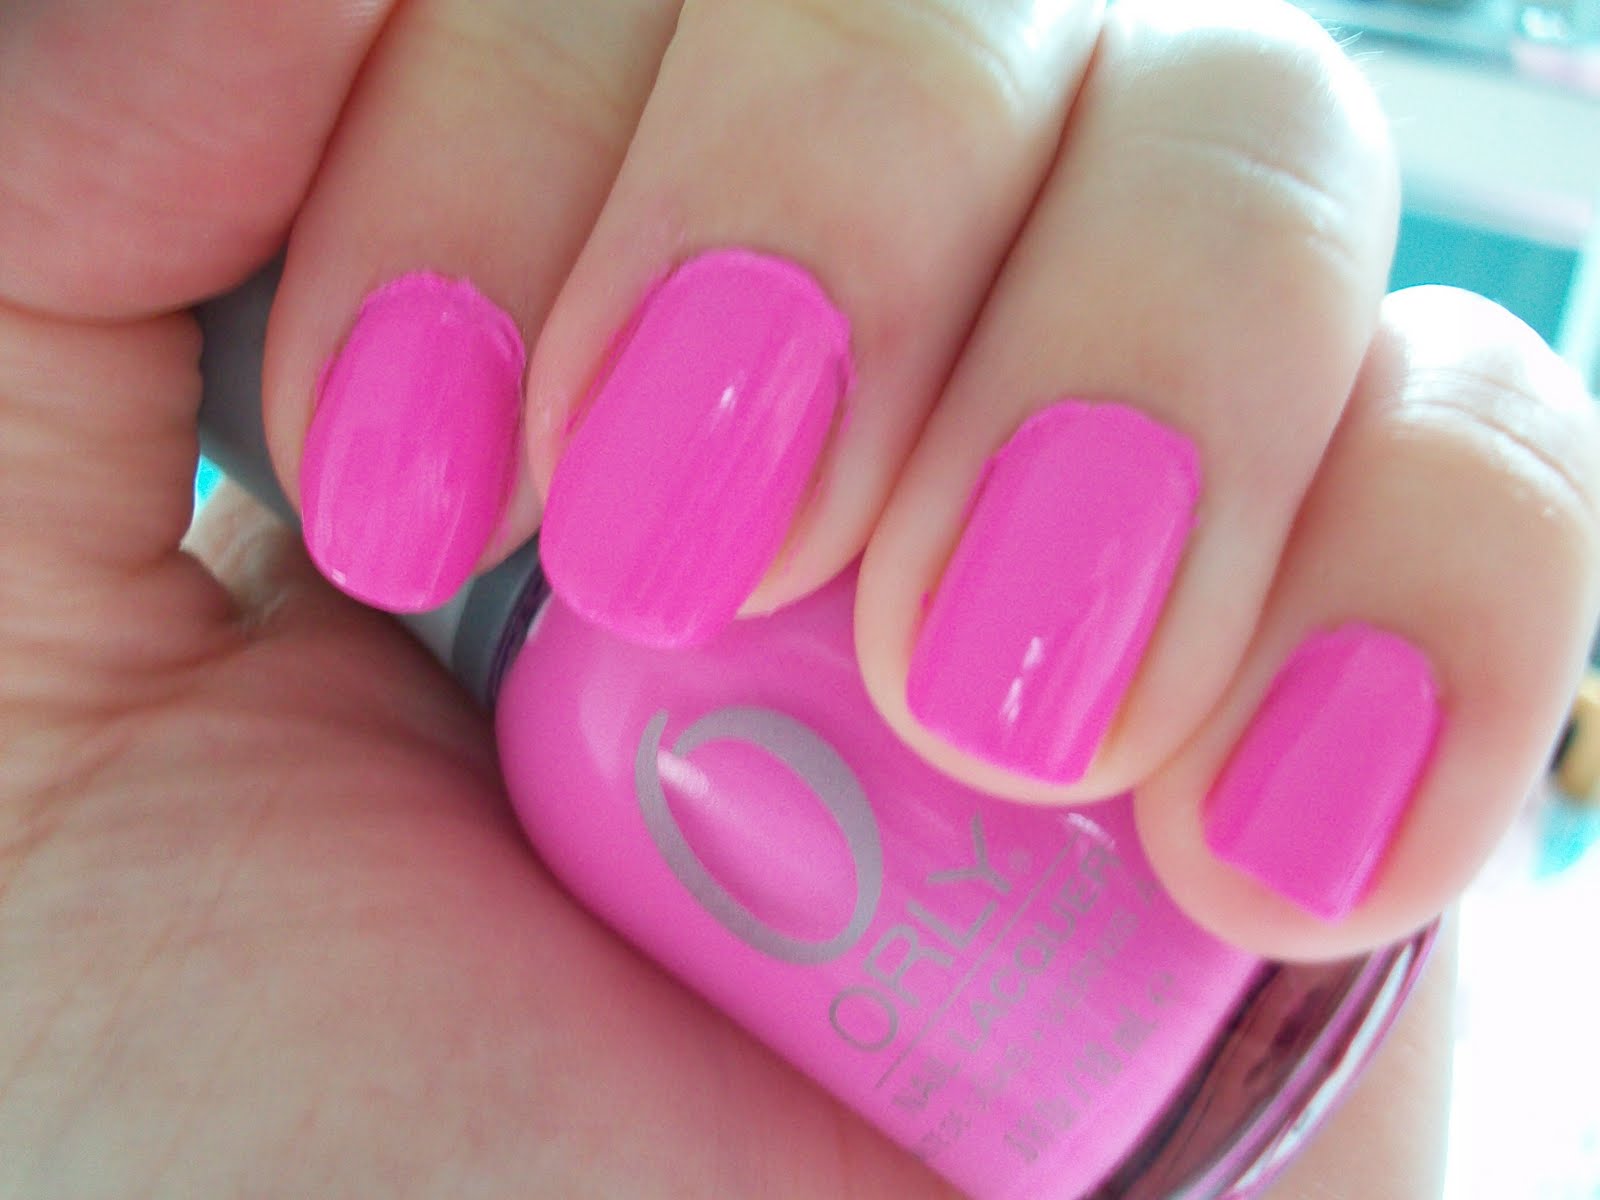 7. Butter London Nail Lacquer in "Teddy Girl" - wide 8